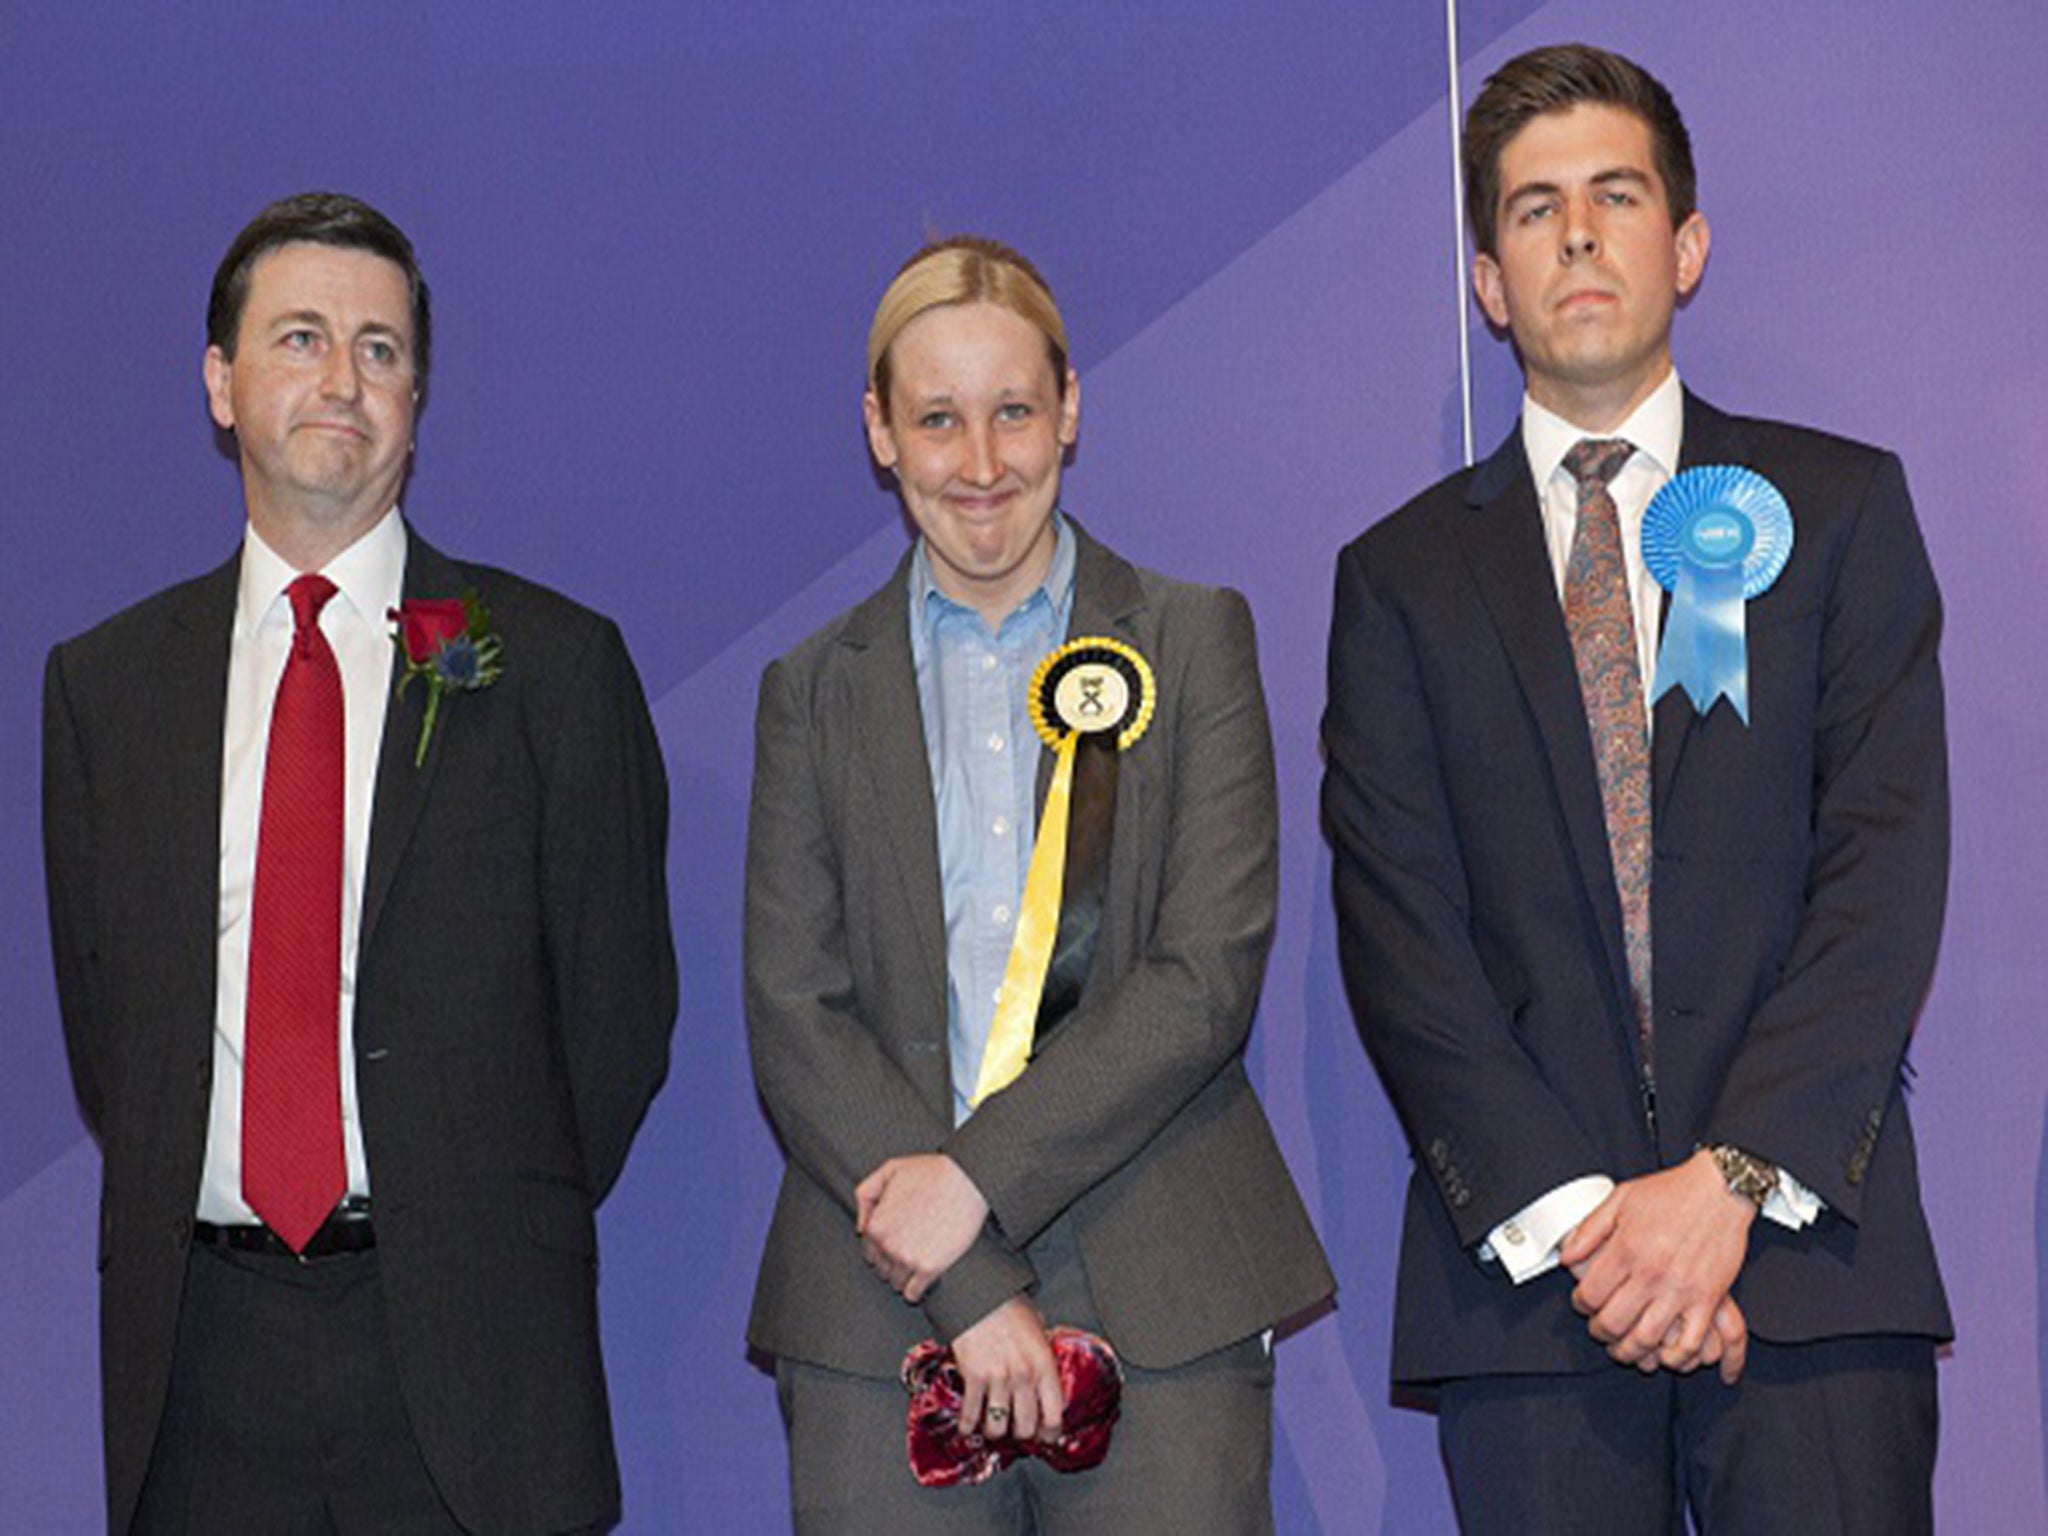 Scottish National Party (SNP) member of parliament, Mhairi Black (C), stands with Labour candidate Douglas Alexander (L) and Fraser Galloway, Conservative Candidate